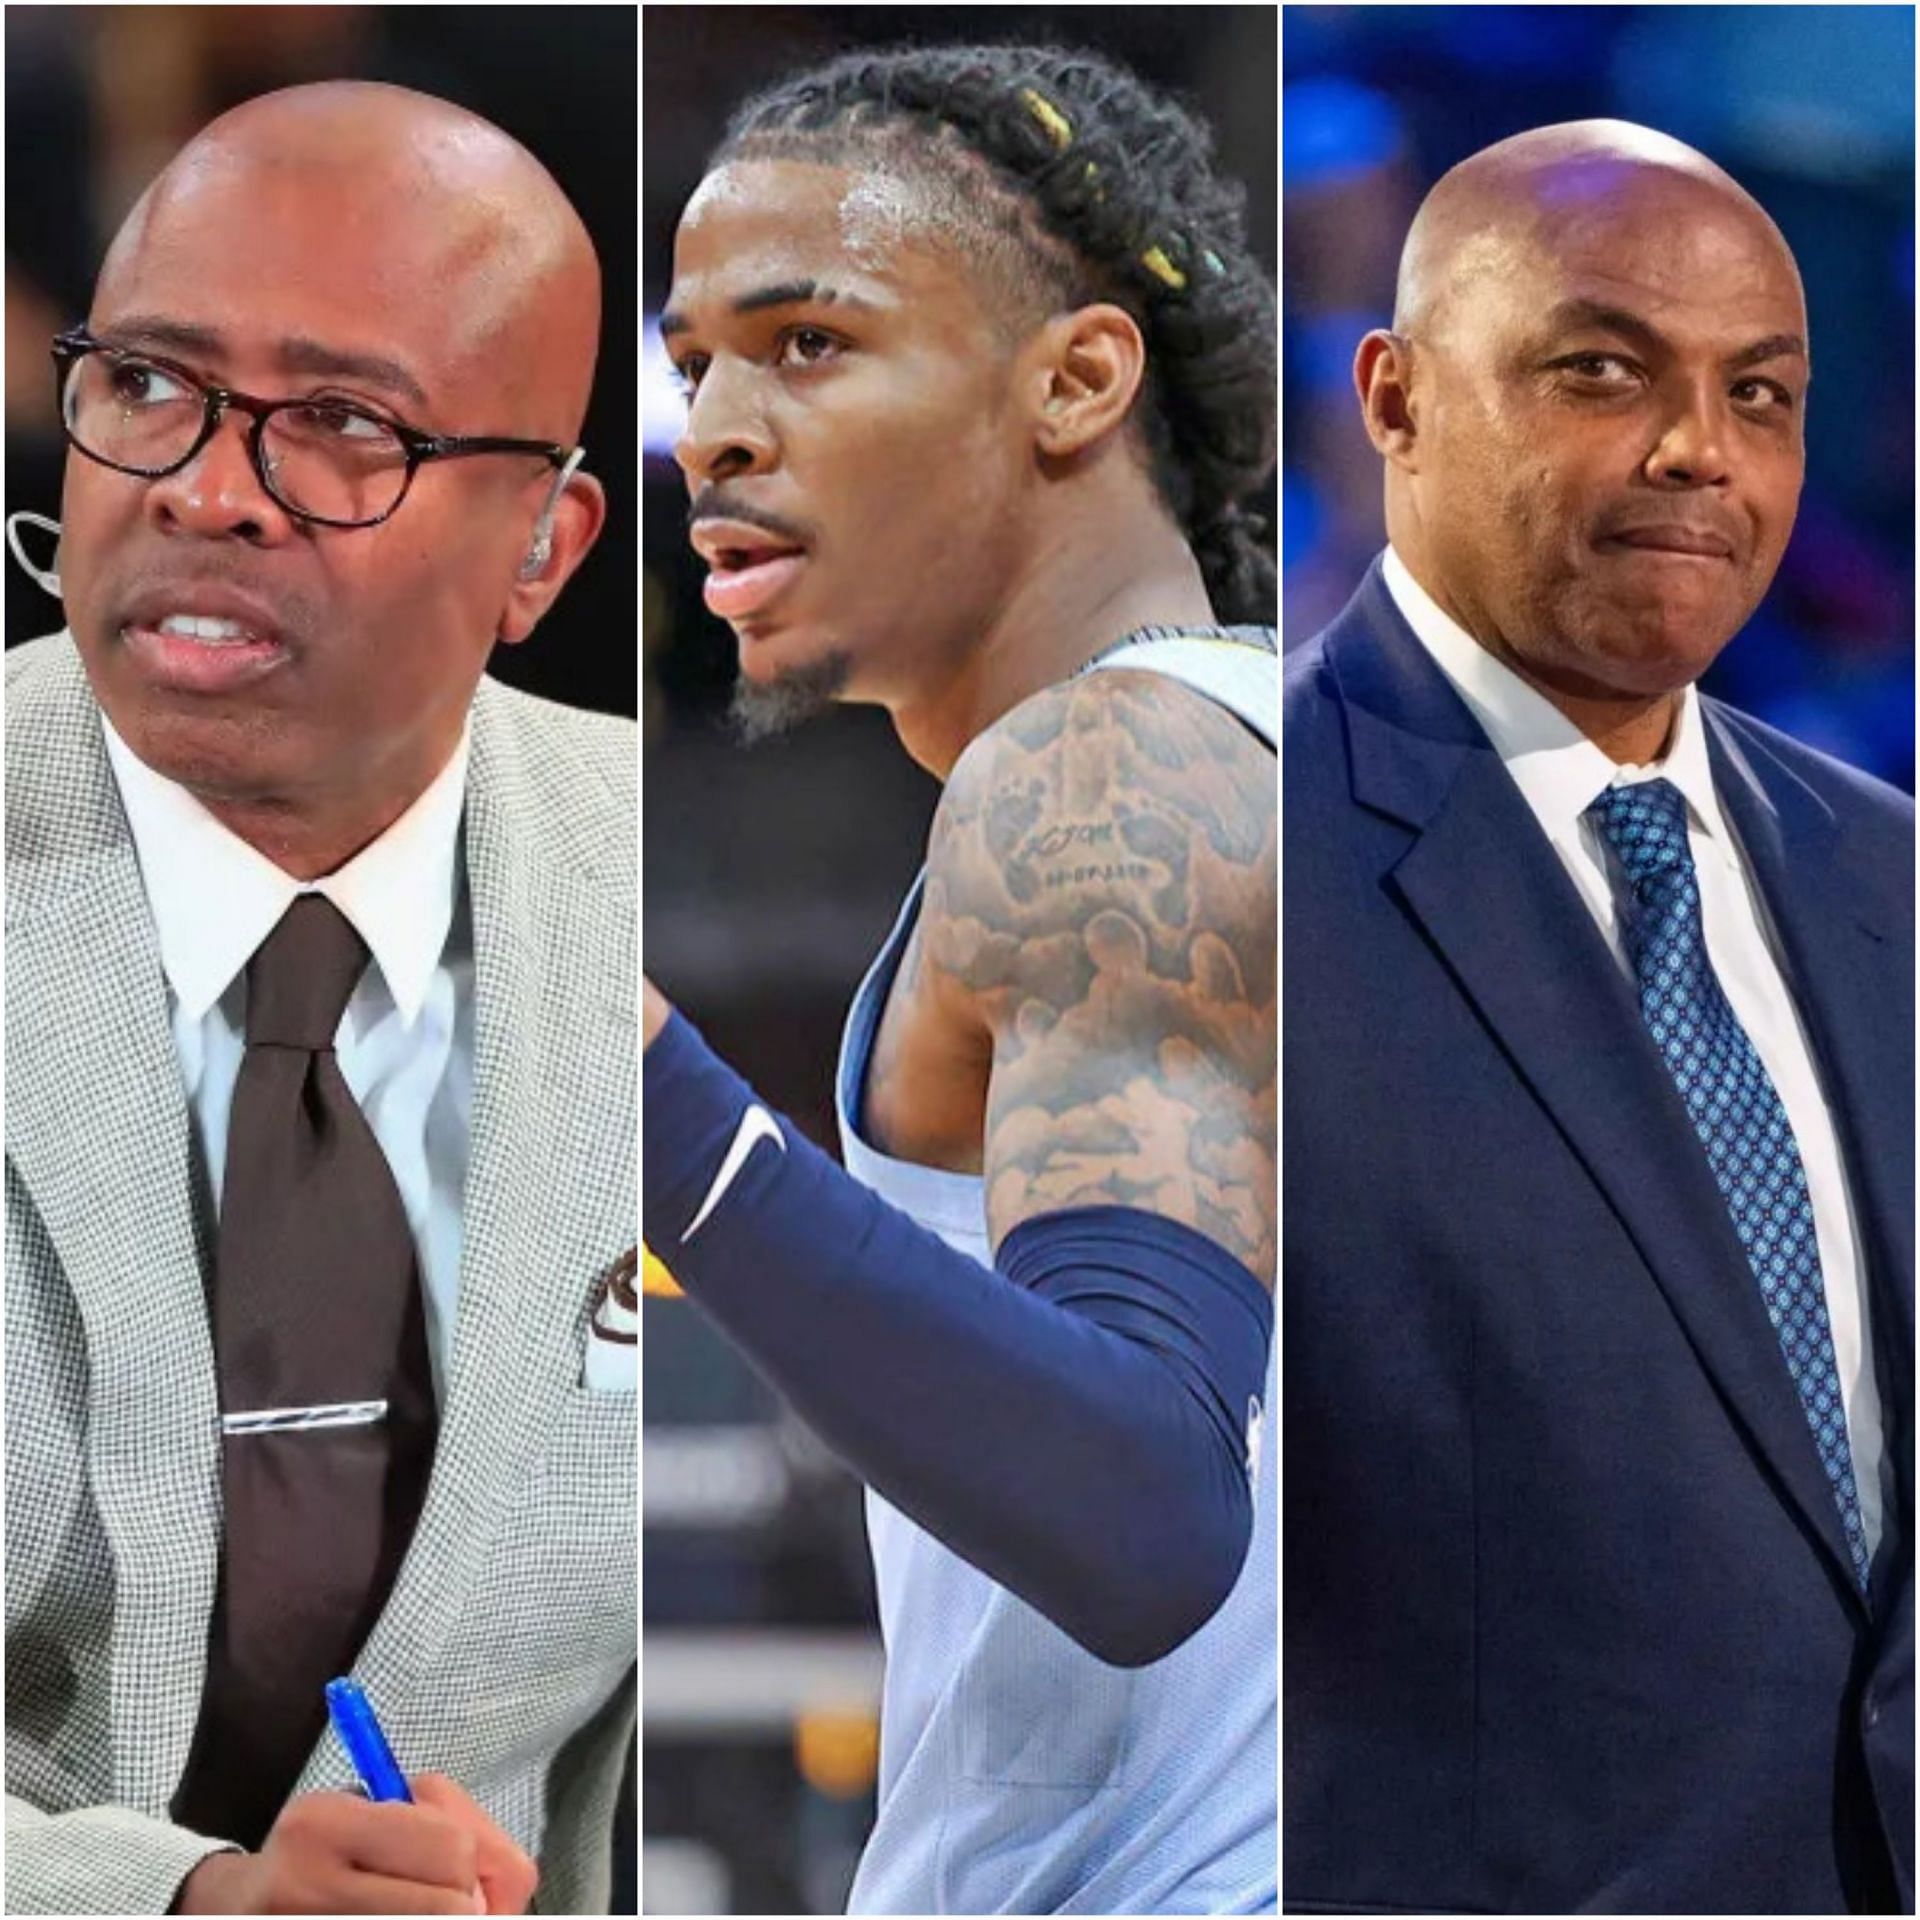 Charles Barkley threatened Kenny Smith following bold suggestion to move Ja Morant from Grizzlies